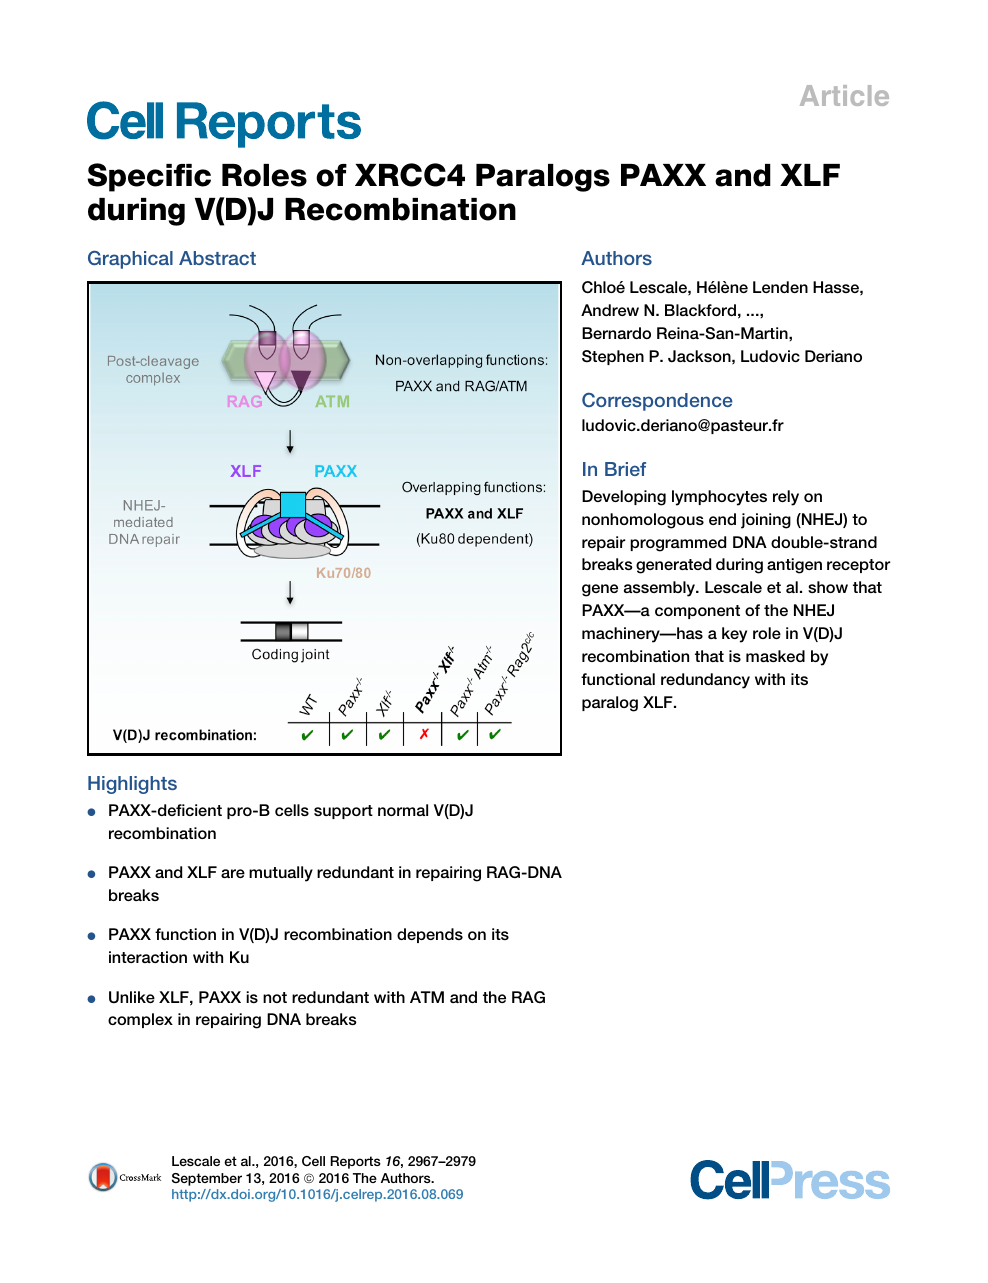 Specific Roles Of Xrcc4 Paralogs Paxx And Xlf During V D J Recombination Topic Of Research Paper In Biological Sciences Download Scholarly Article Pdf And Read For Free On Cyberleninka Open Science Hub